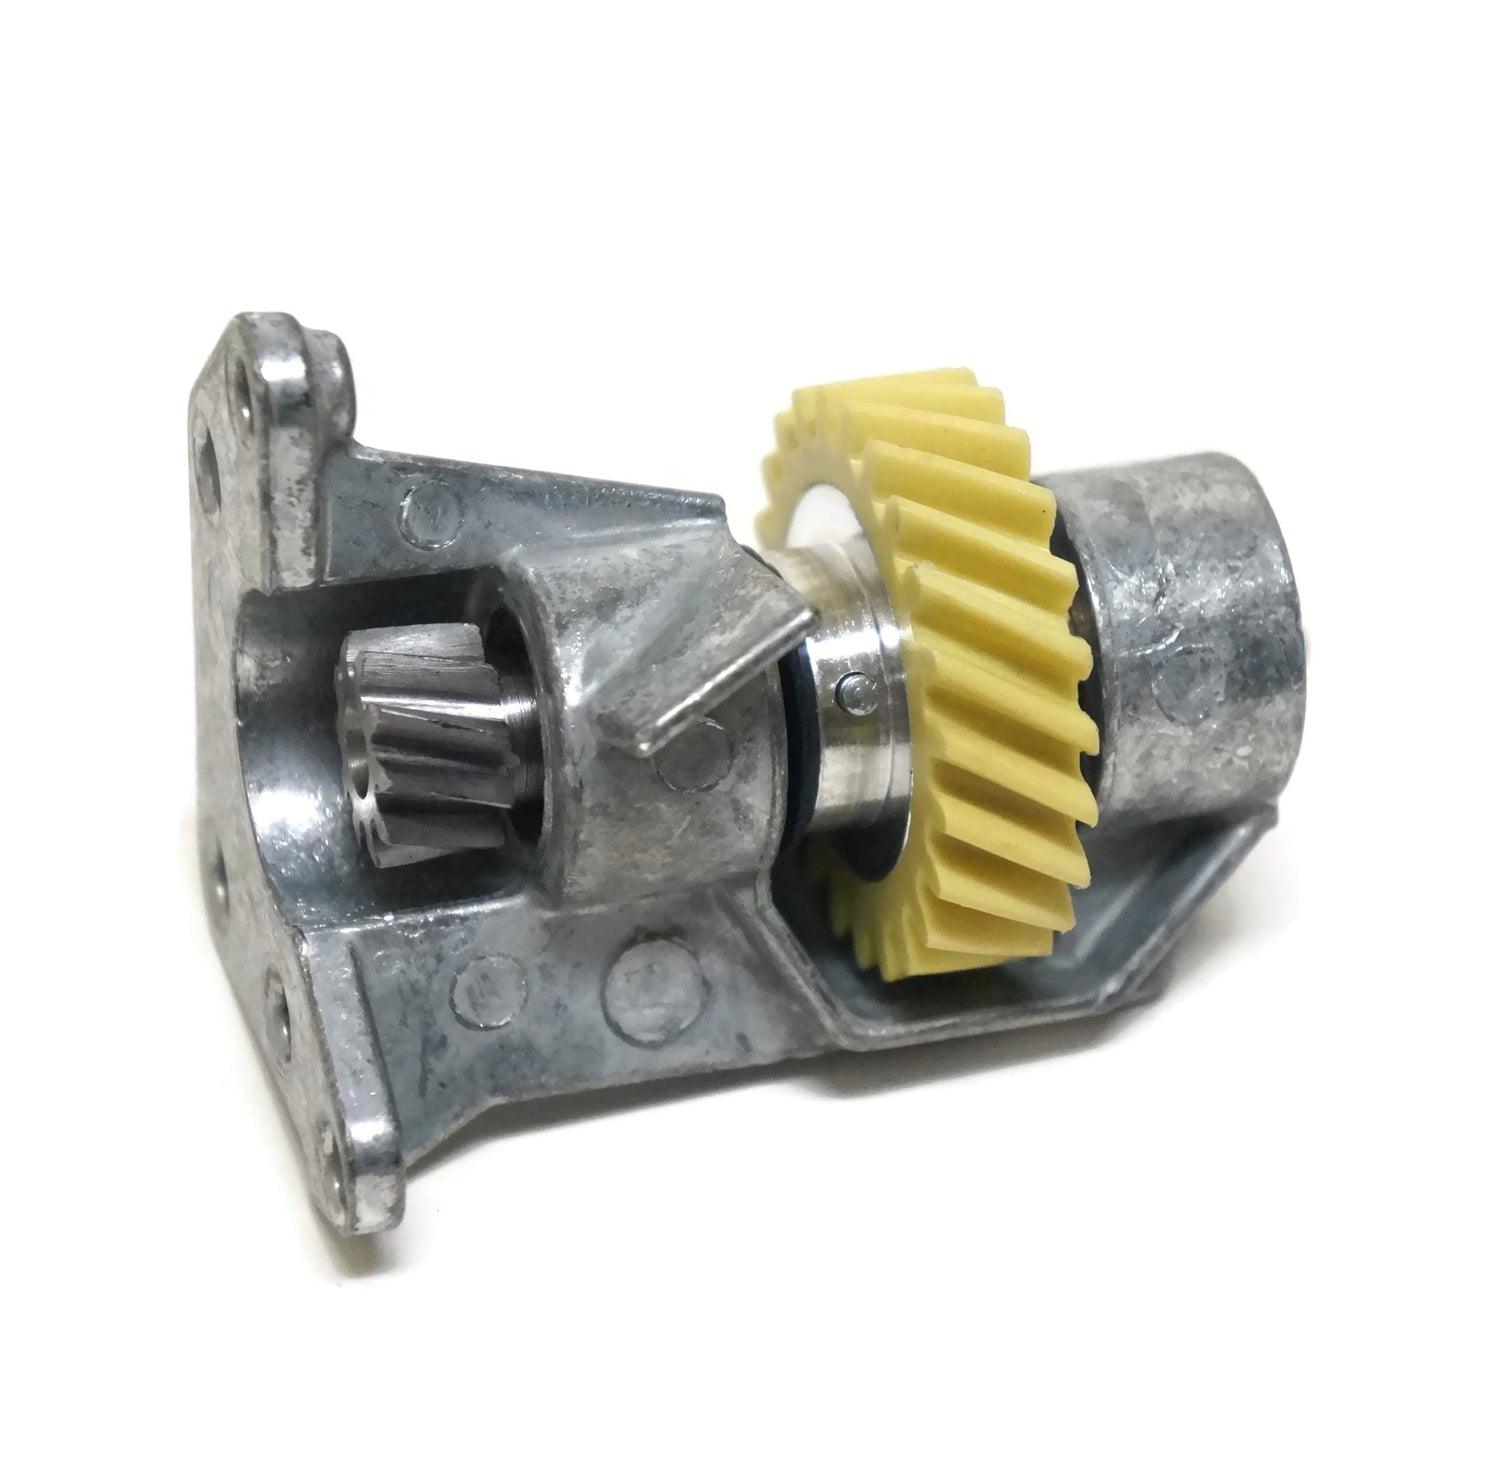 240309-2 - Worm Gear Assembly Replacement for Kitchenaid Stand